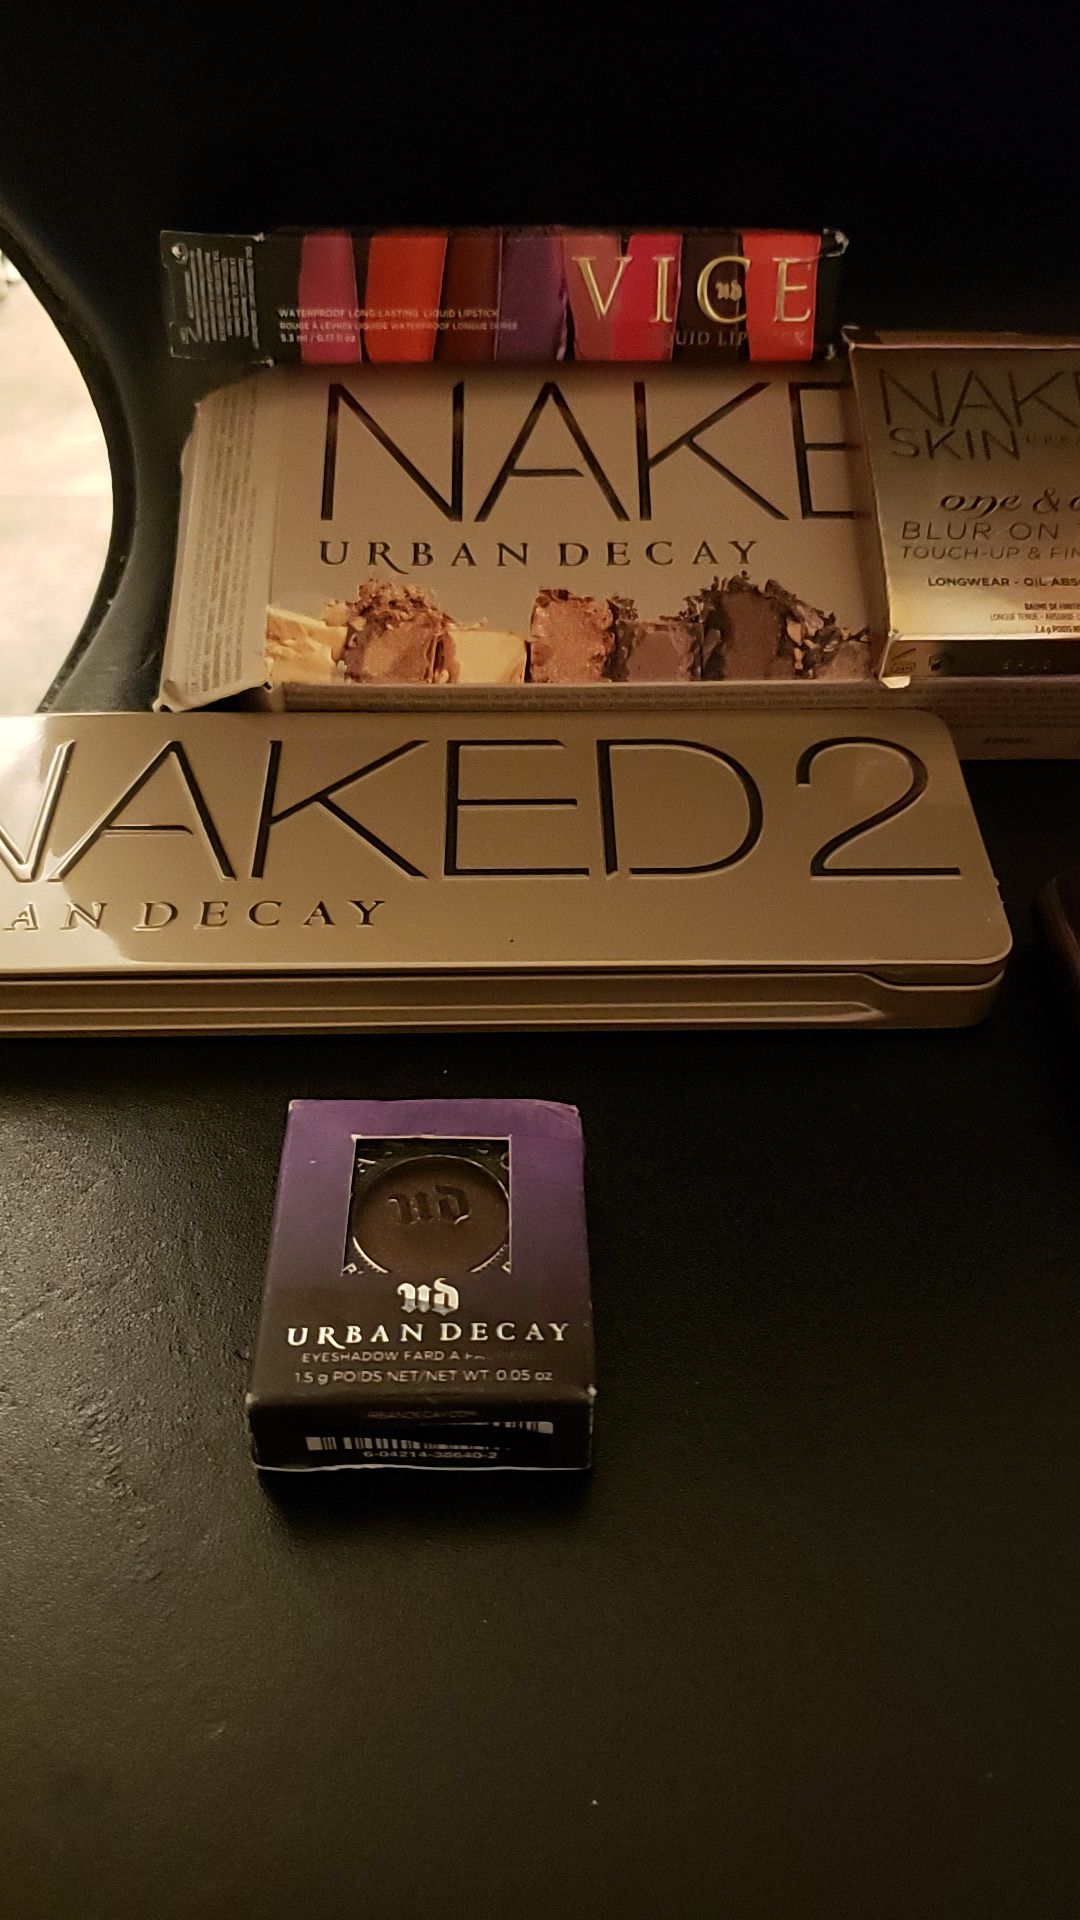 Urban decay naked2 ayeshadow liquid lipstick naked skin all new in boxes